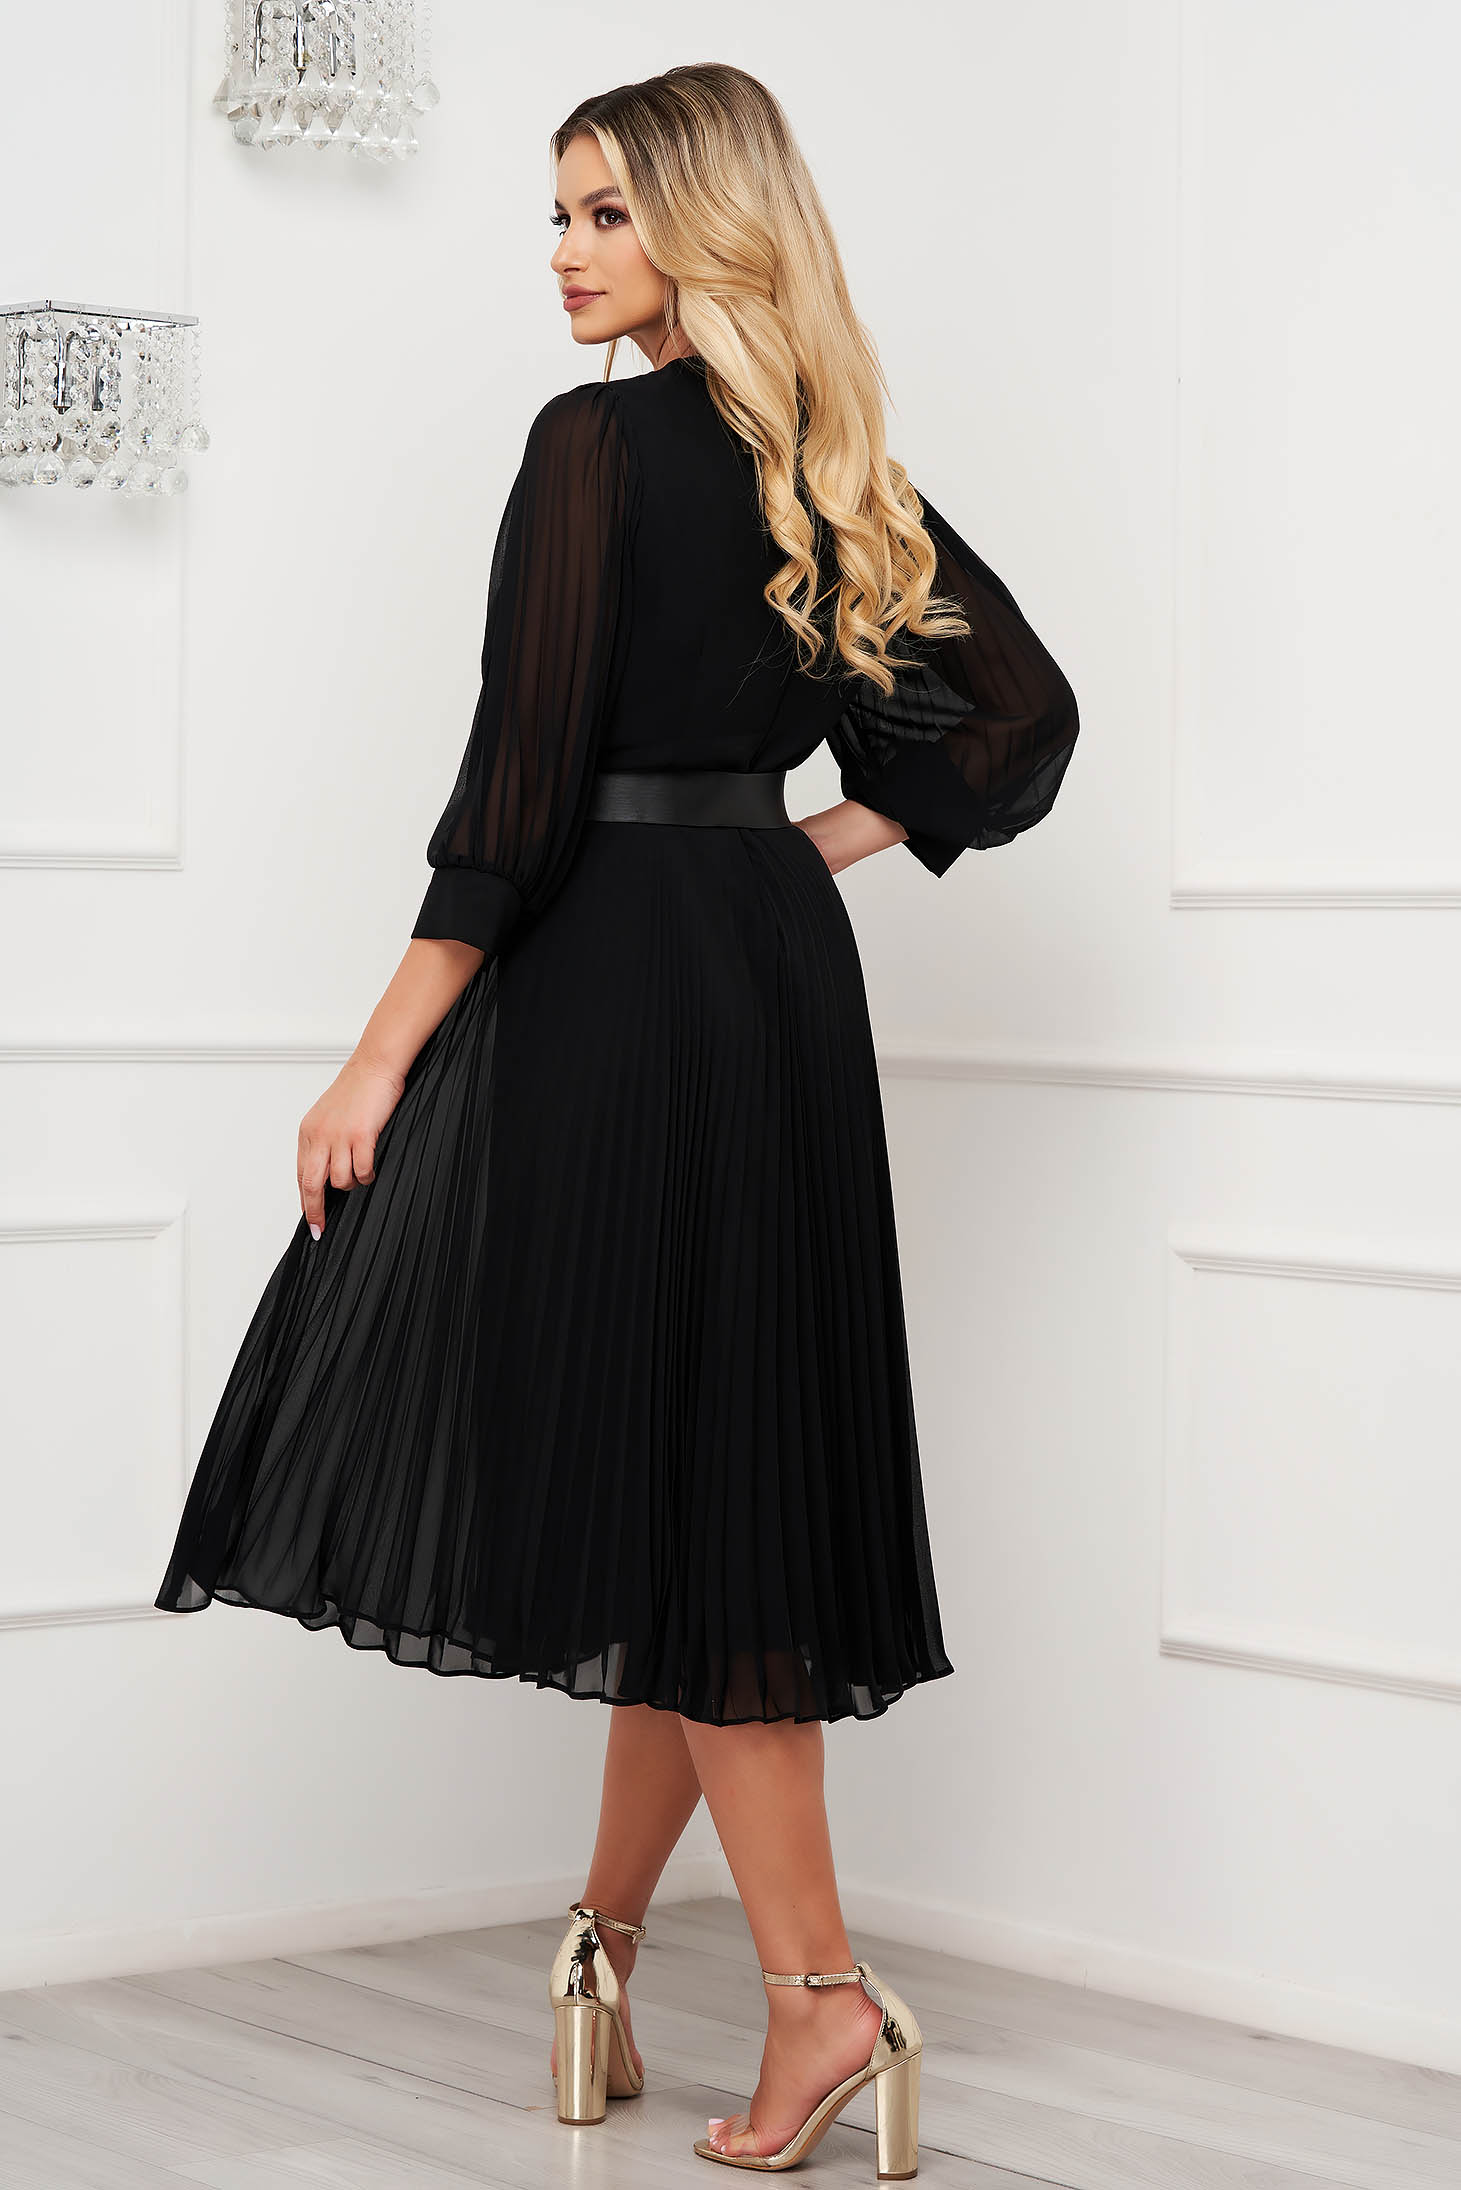 Black Dress Pleated From Veil Fabric Midi Cloche Accessorized With Belt 6745